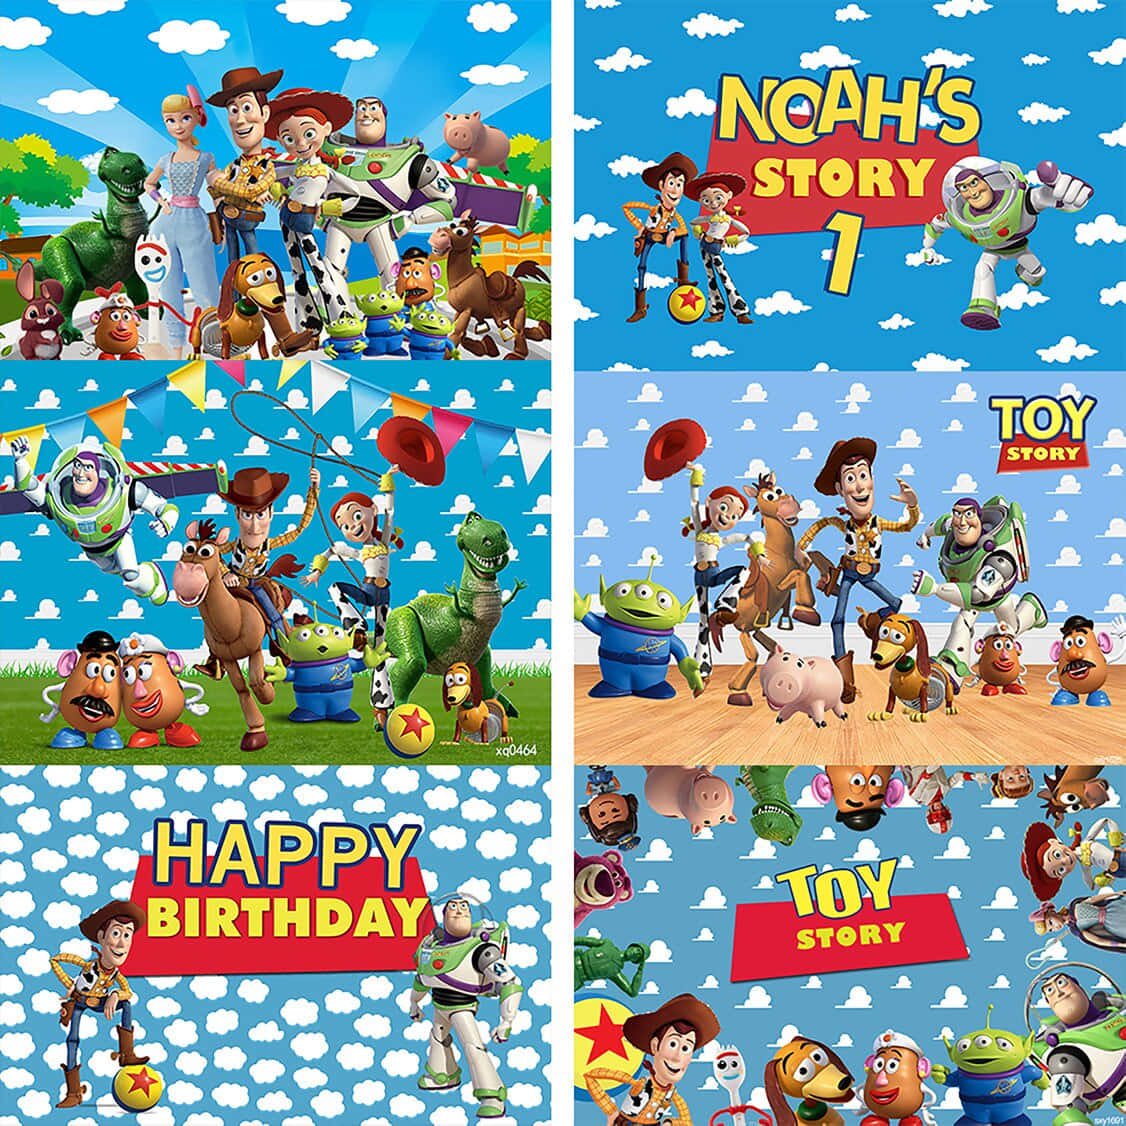 Reach for the sky with Toy Story clouds!